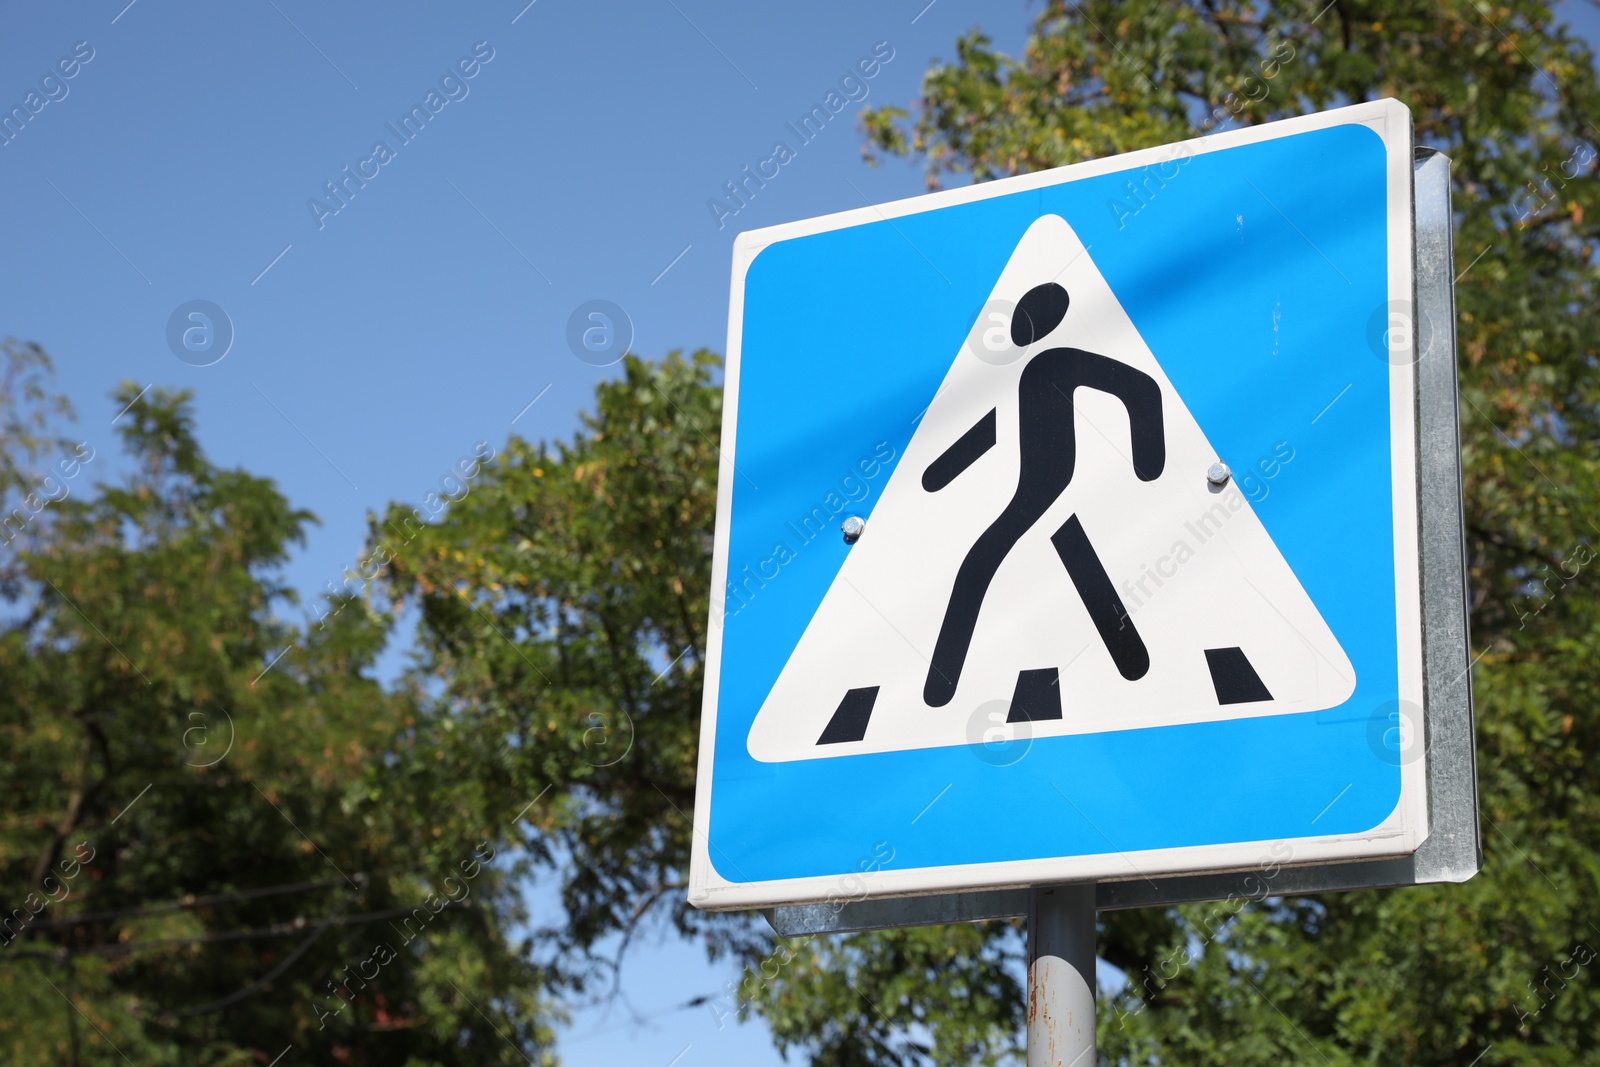 Photo of Pedestrian crossing road sign outdoors on sunny day